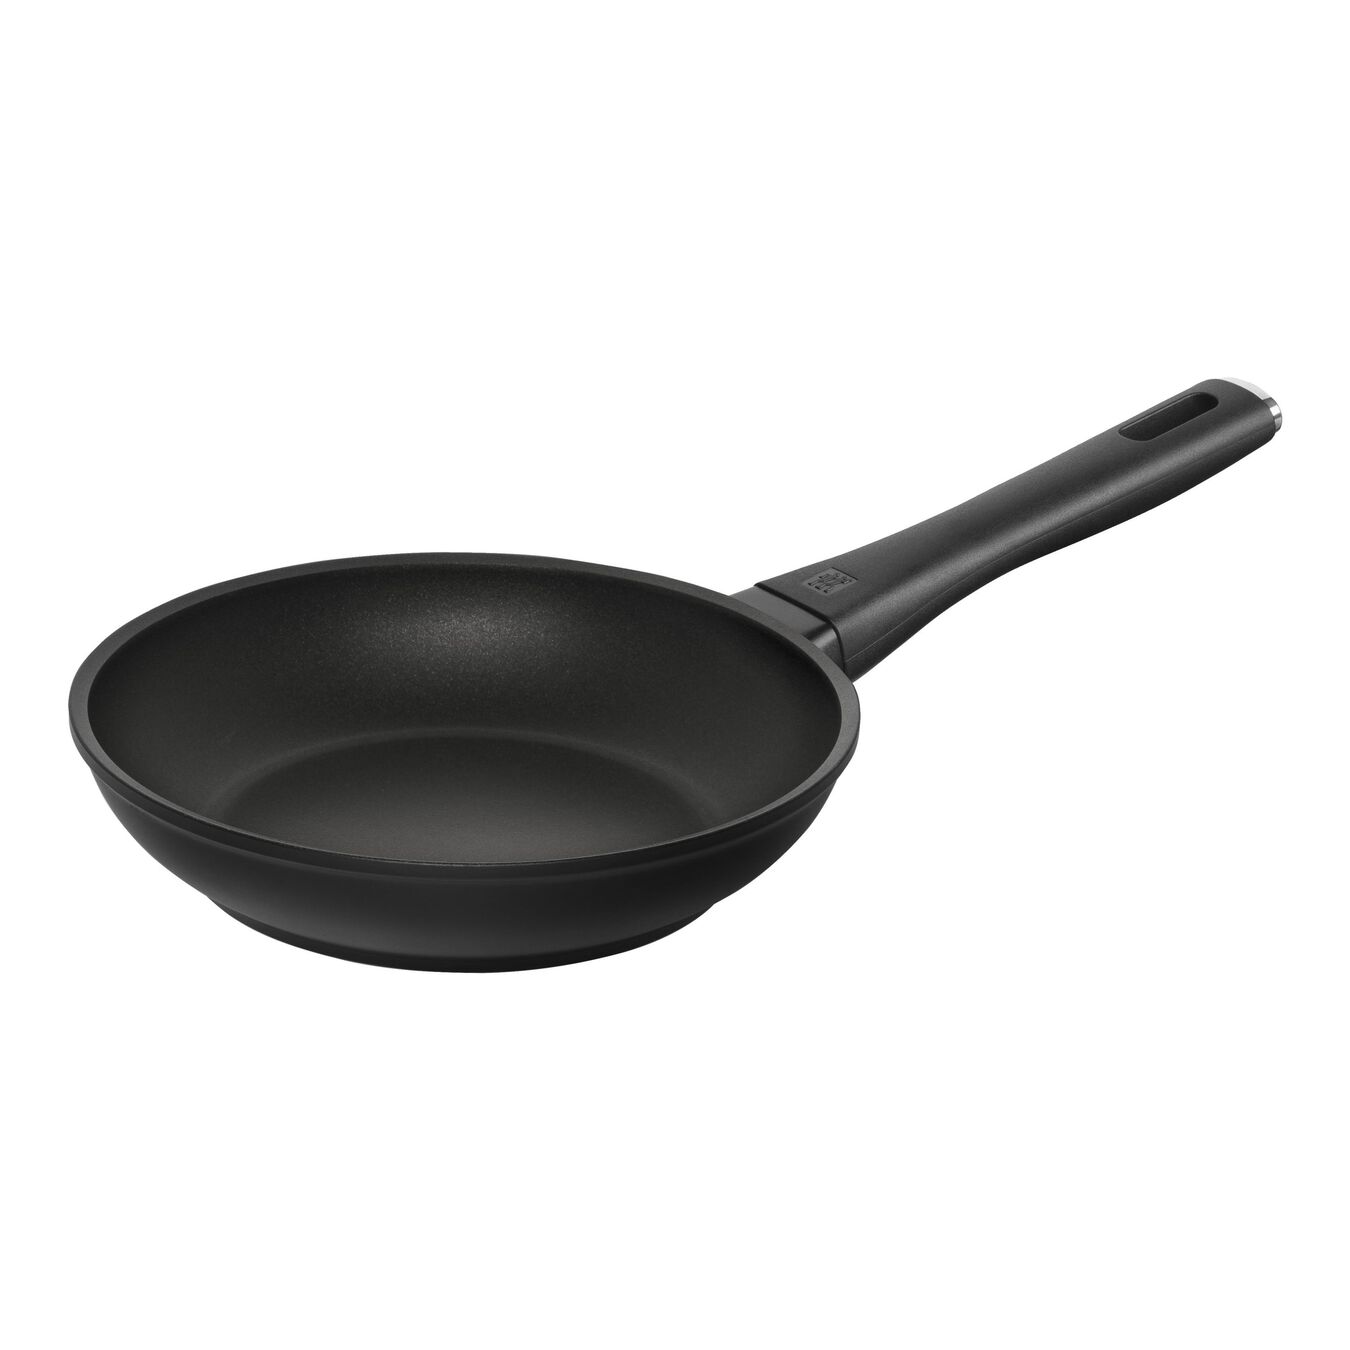 Details about   Non Stick Kitchen Fry Pan Skillet Omelette Cookware 8 inch/10 inch/11 inch